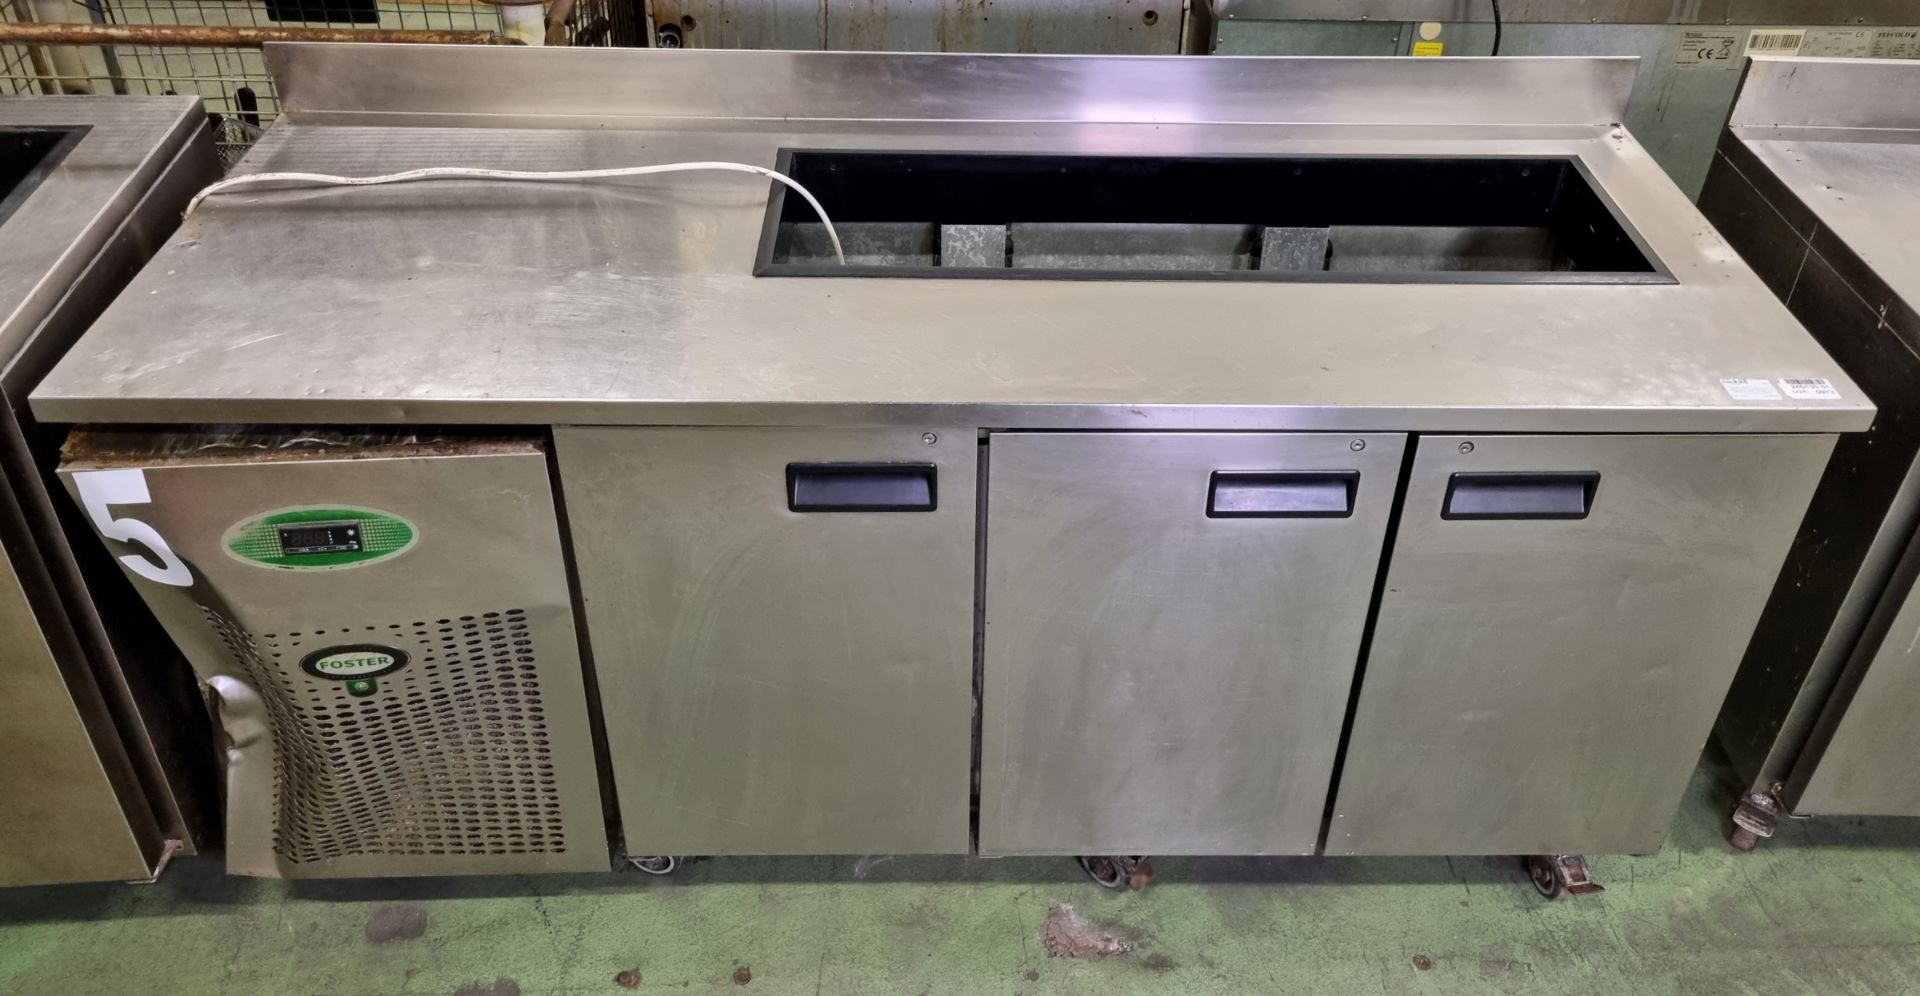 Foster EPRO 1 / 3R 3 door refrigerated prep counter - W 1870 x D 700 x H 960mm - DAMAGED PANEL - Image 2 of 7